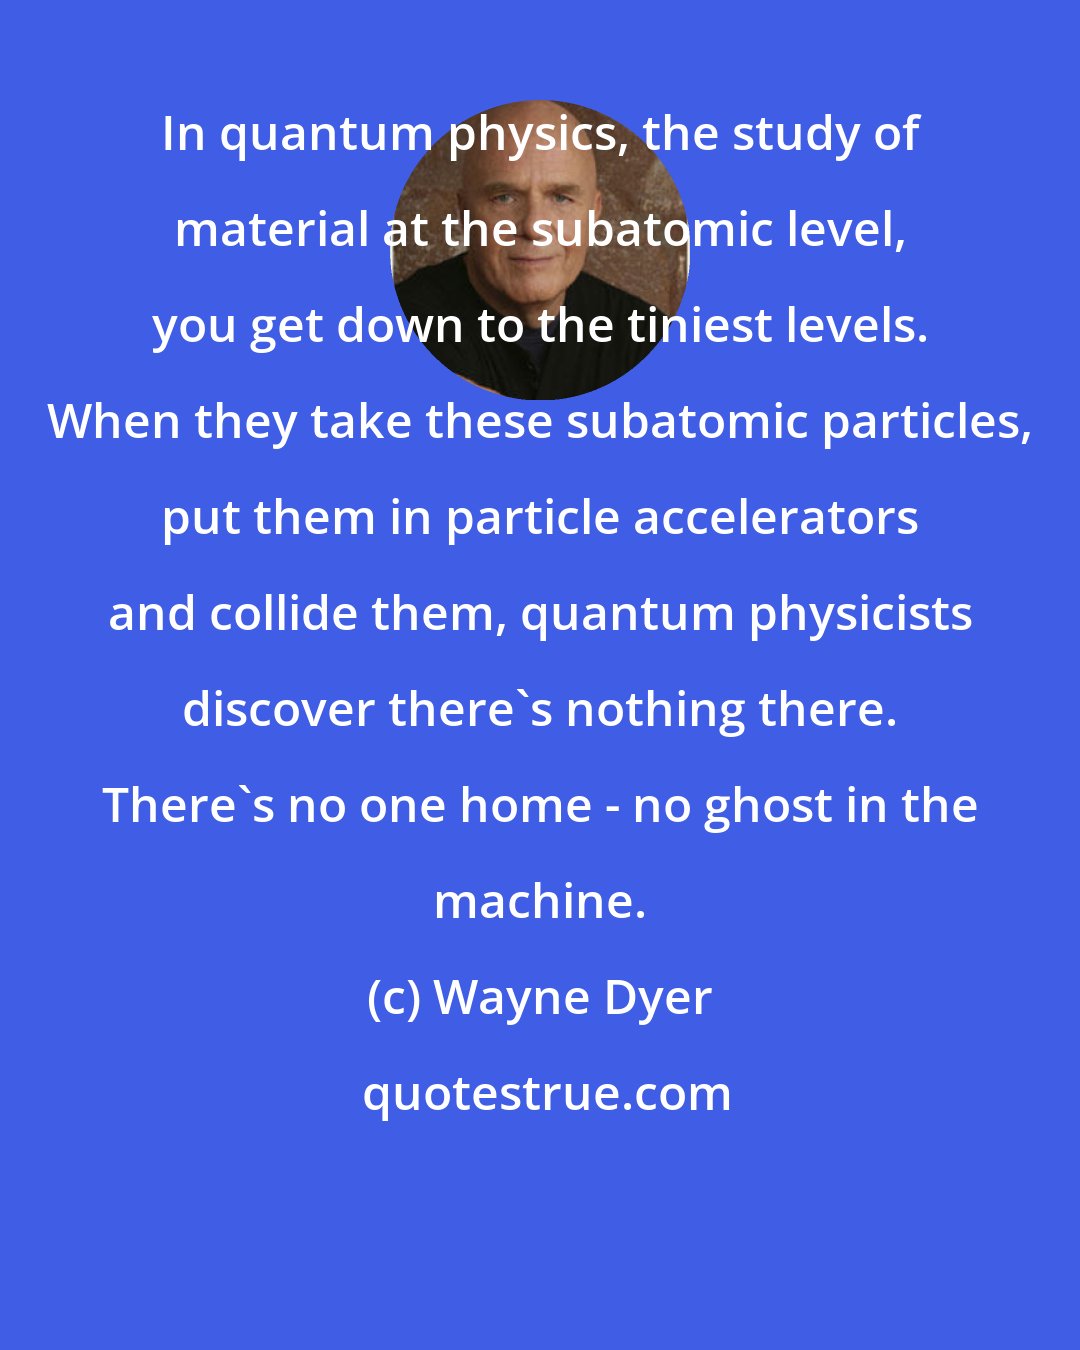 Wayne Dyer: In quantum physics, the study of material at the subatomic level, you get down to the tiniest levels. When they take these subatomic particles, put them in particle accelerators and collide them, quantum physicists discover there's nothing there. There's no one home - no ghost in the machine.